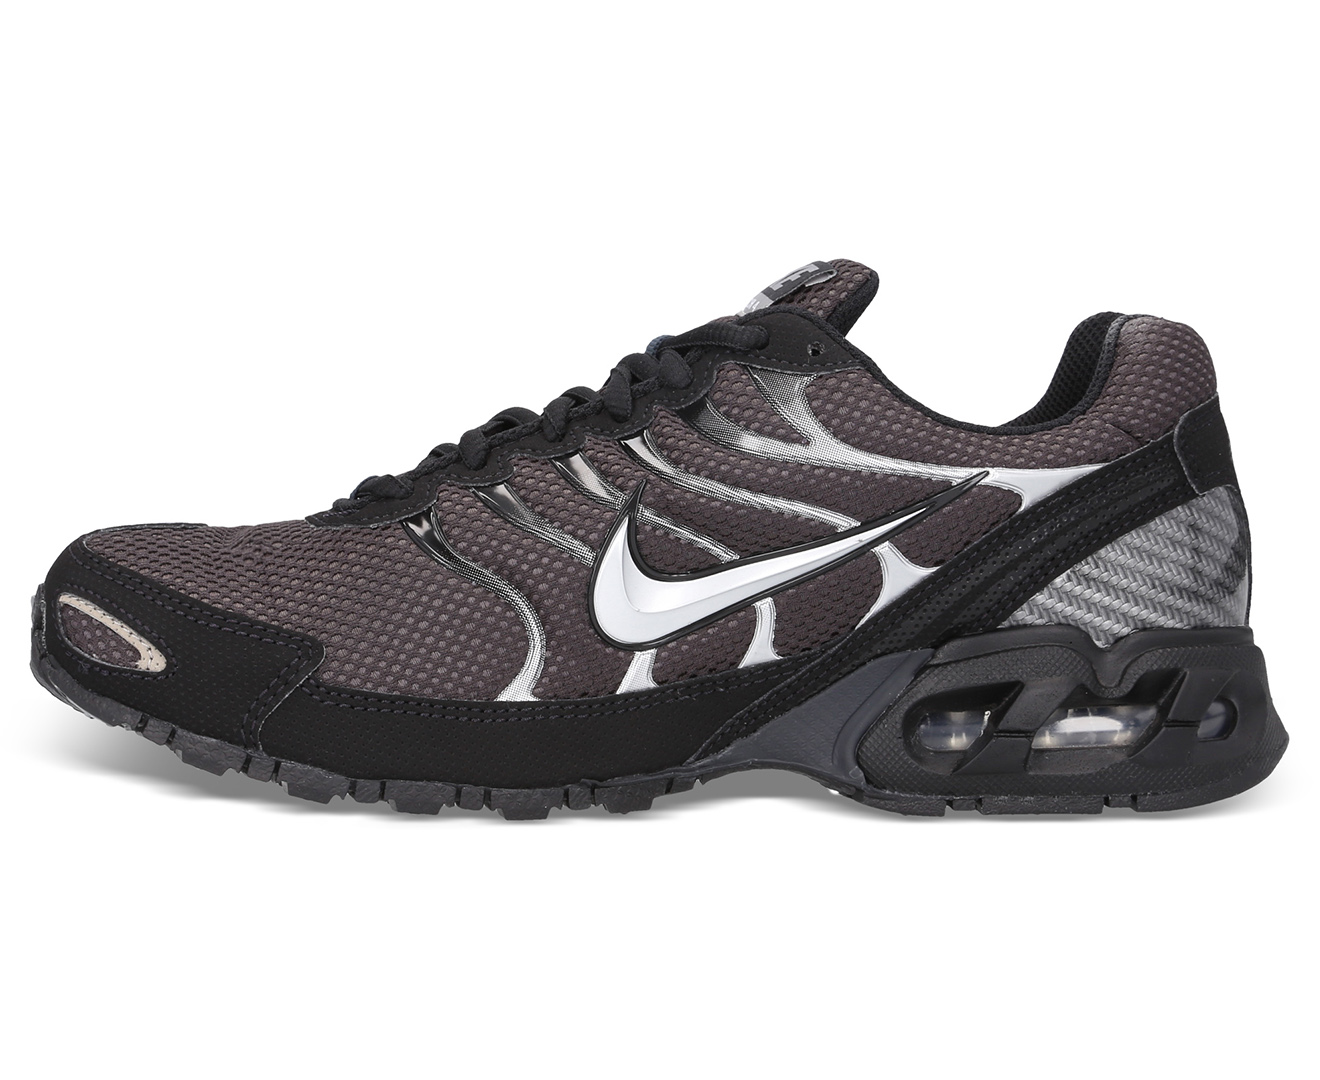 Nike Men's Air Max Torch 4 Running Shoes - Black/White | Catch.co.nz